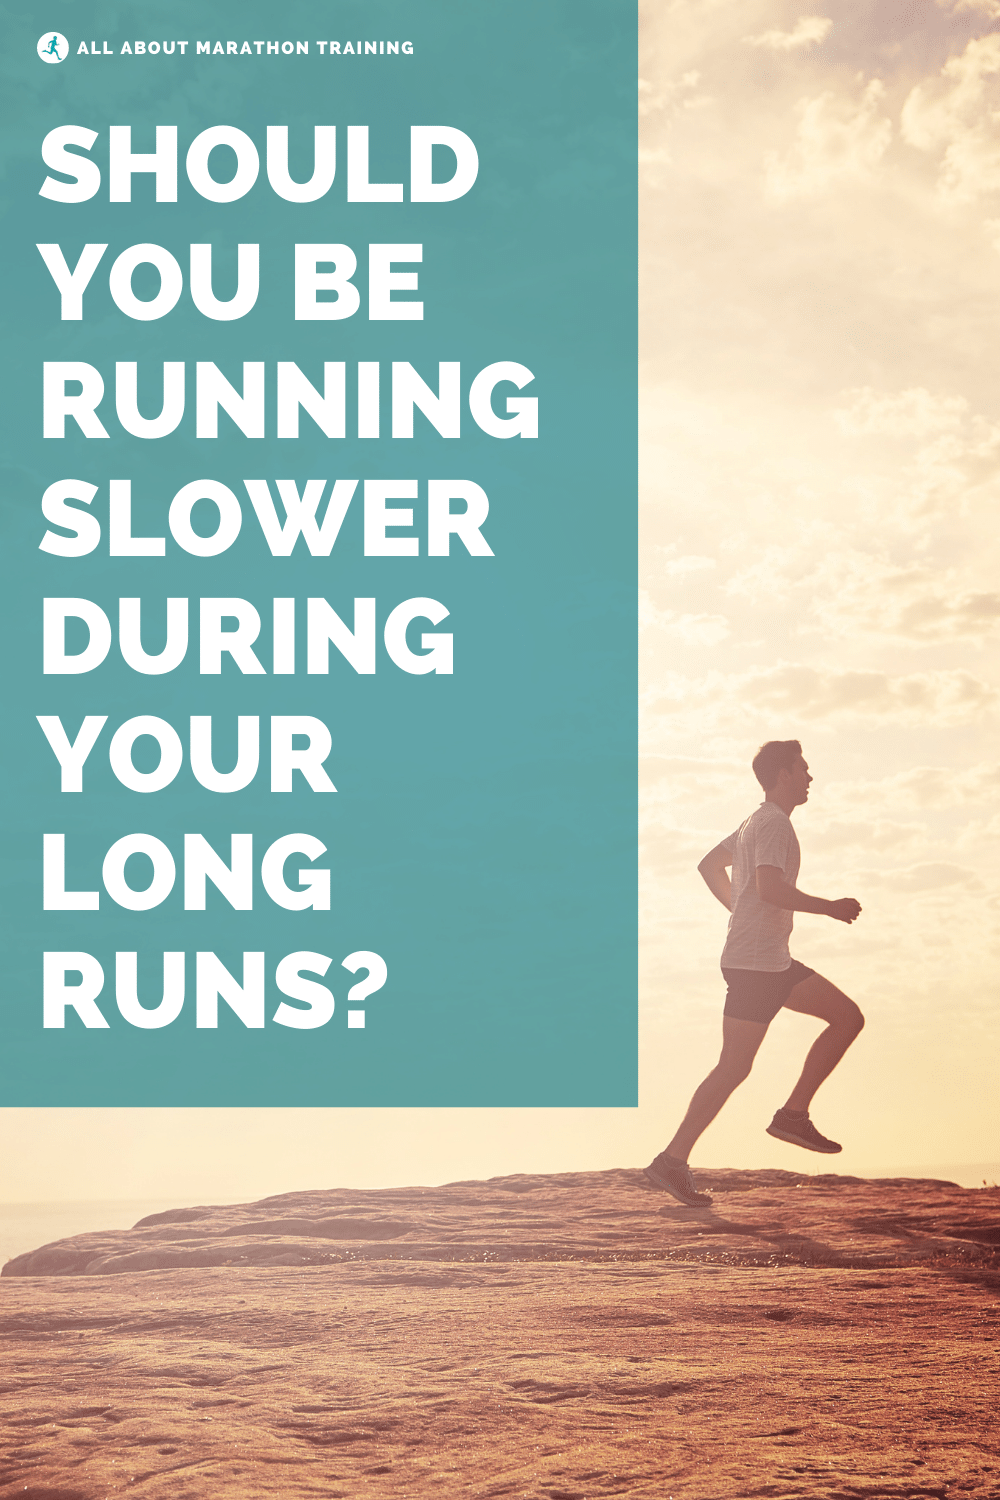 What is the Optimal Long Run Pace - Runners Connect